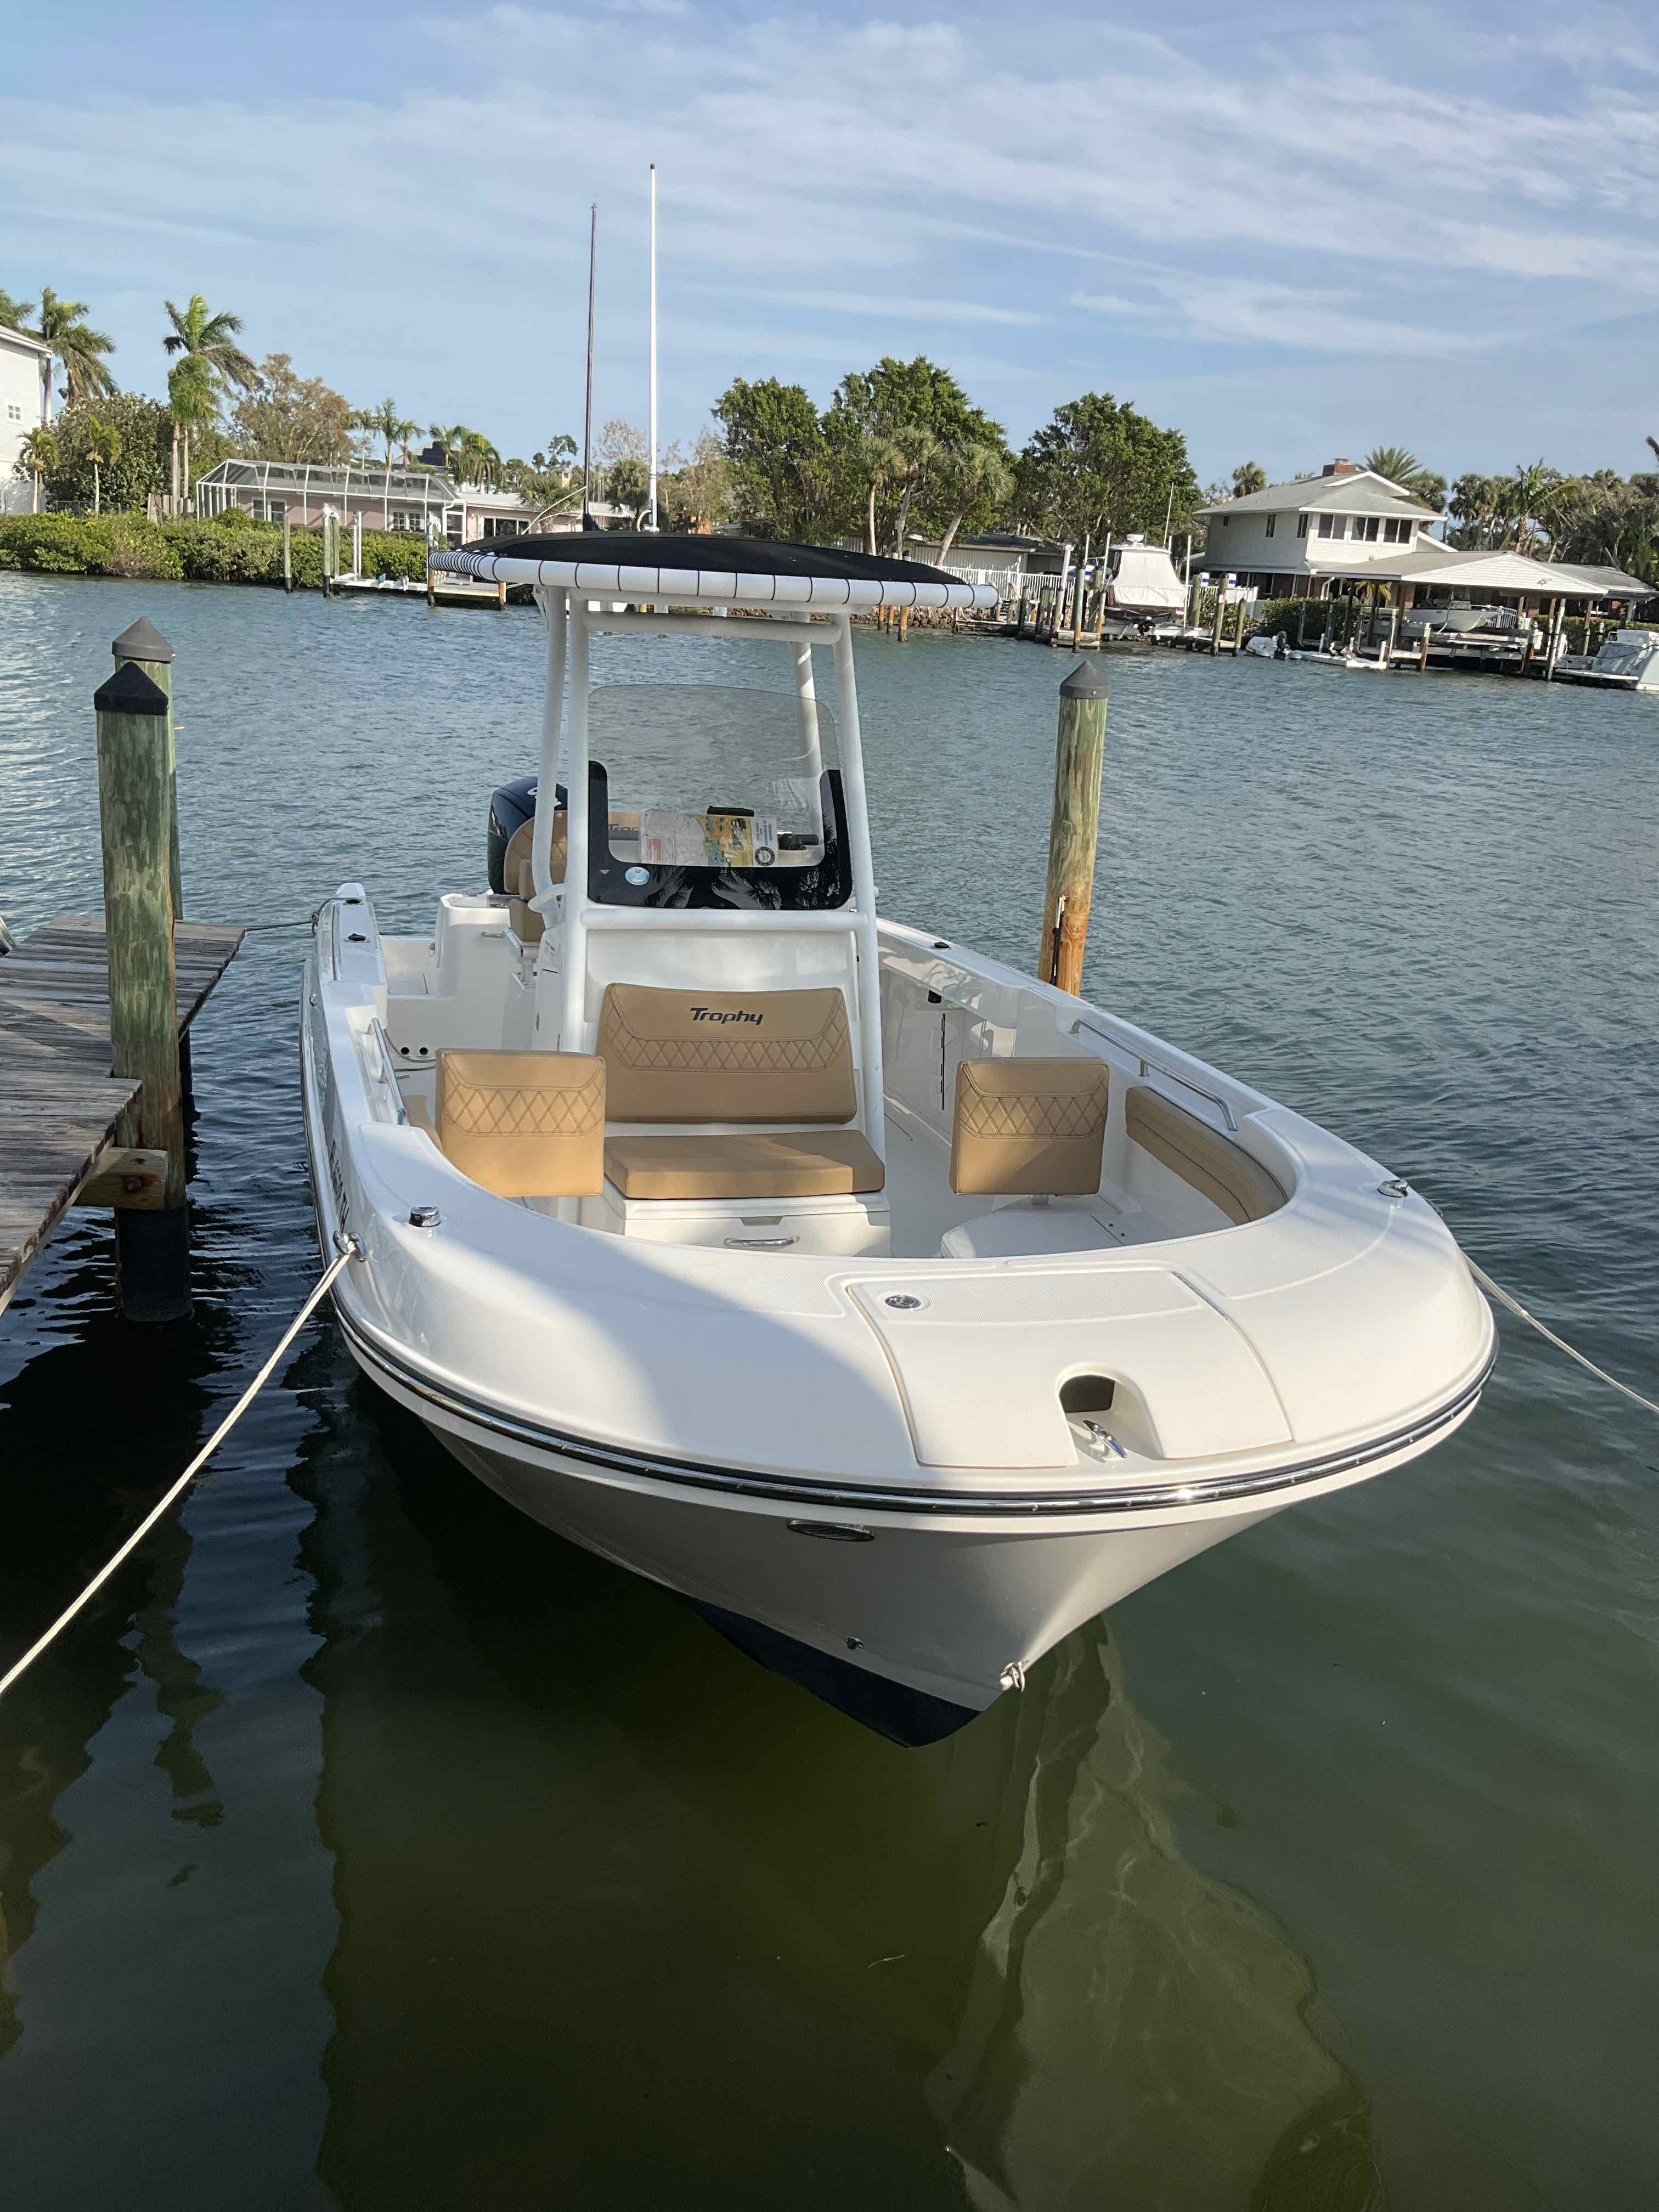 SKY BOX (24FT Offshore Bayliner Trophy Center Console - 250 HP~Fishing)